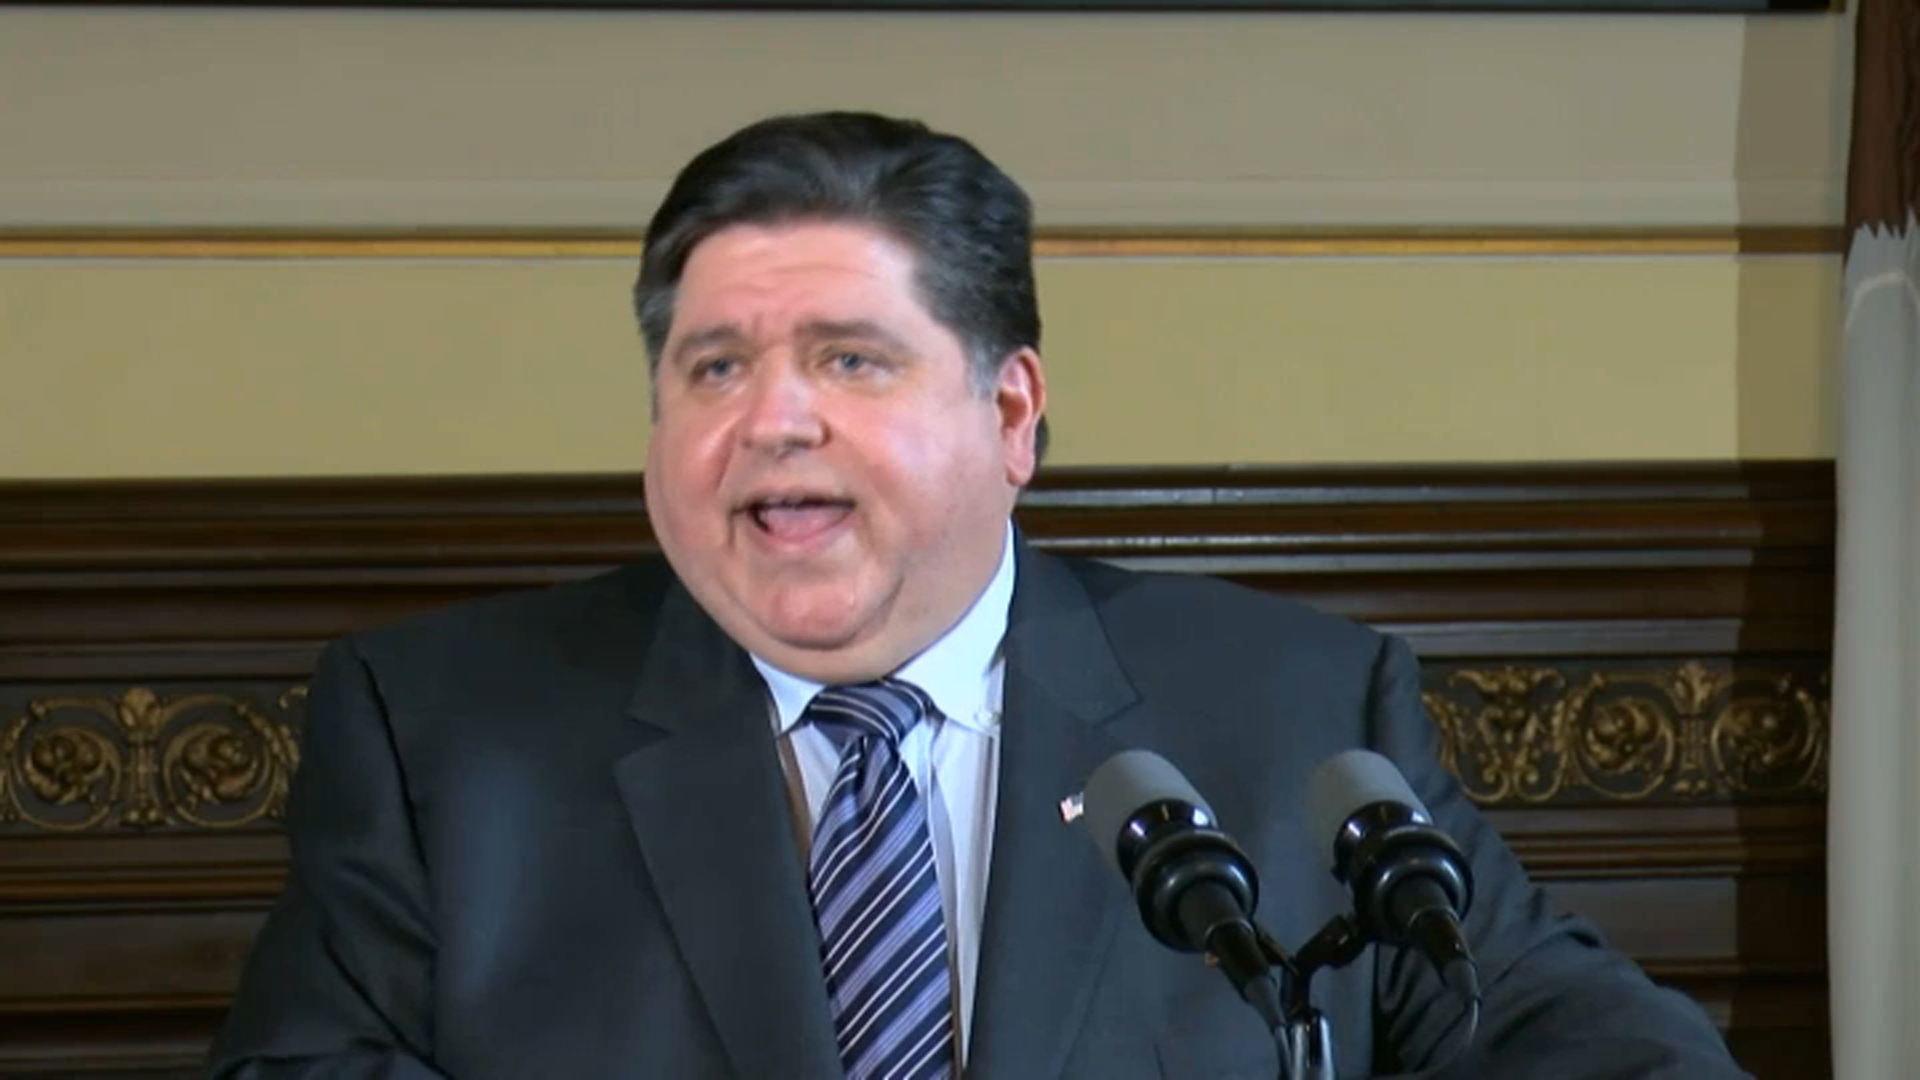 Pritzker Calls for Federal Law, Protests to Protect Abortion